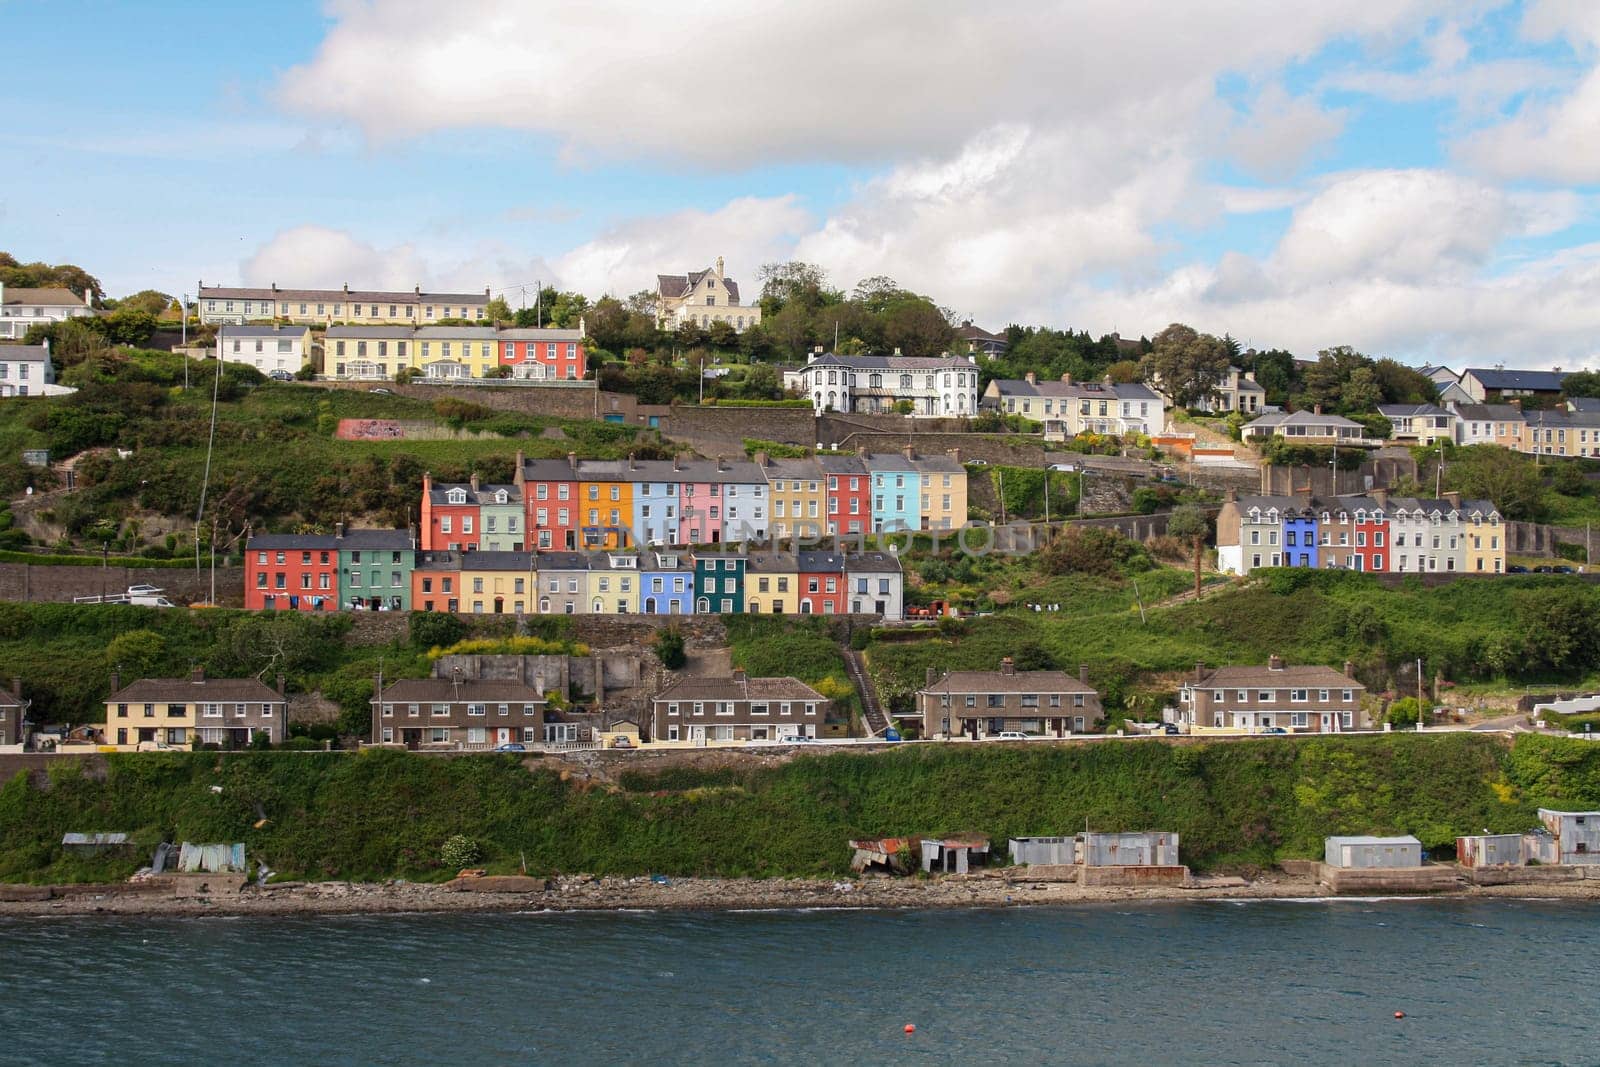 Cobh City View, Ireland by oliverfoerstner